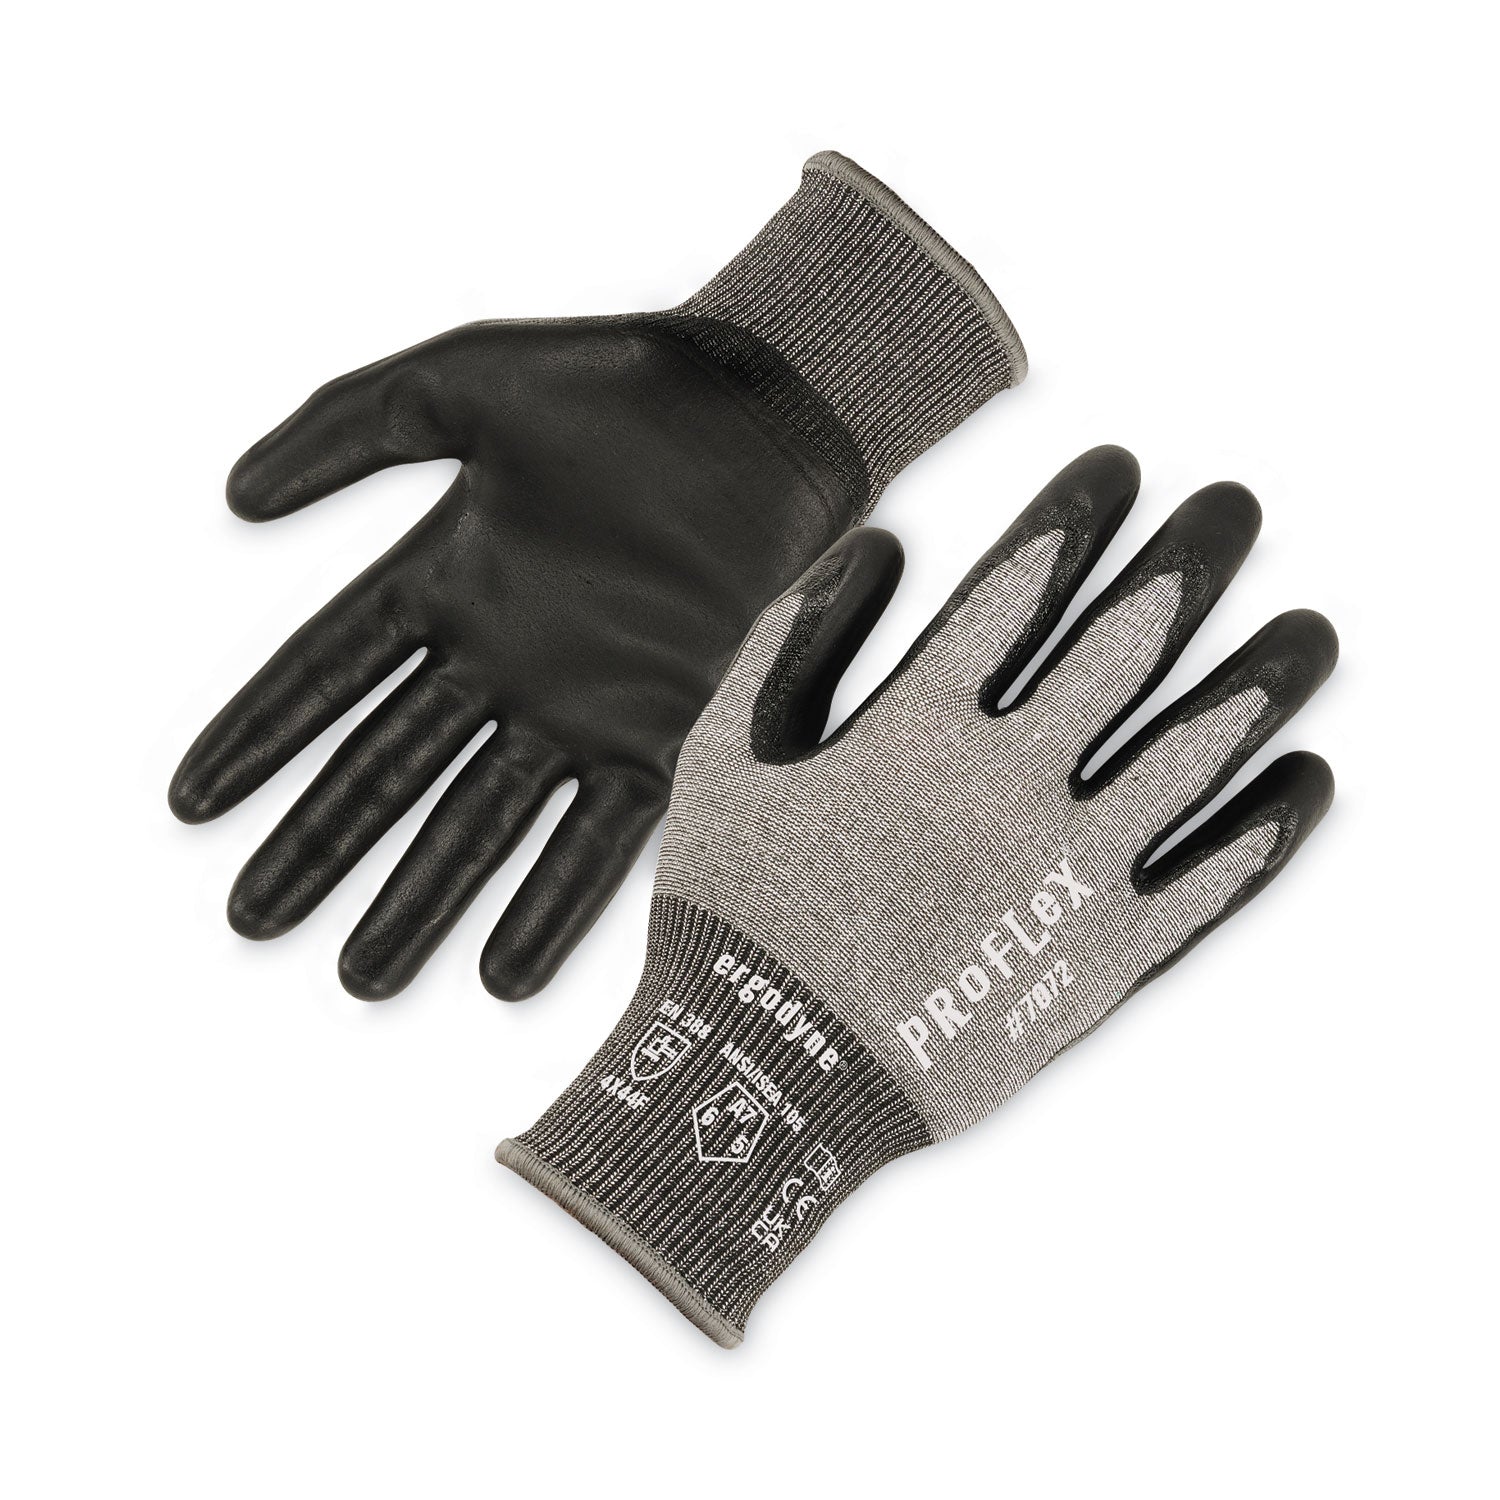 proflex-7072-ansi-a7-nitrile-coated-cr-gloves-gray-small-12-pairs-pack-ships-in-1-3-business-days_ego10302 - 1